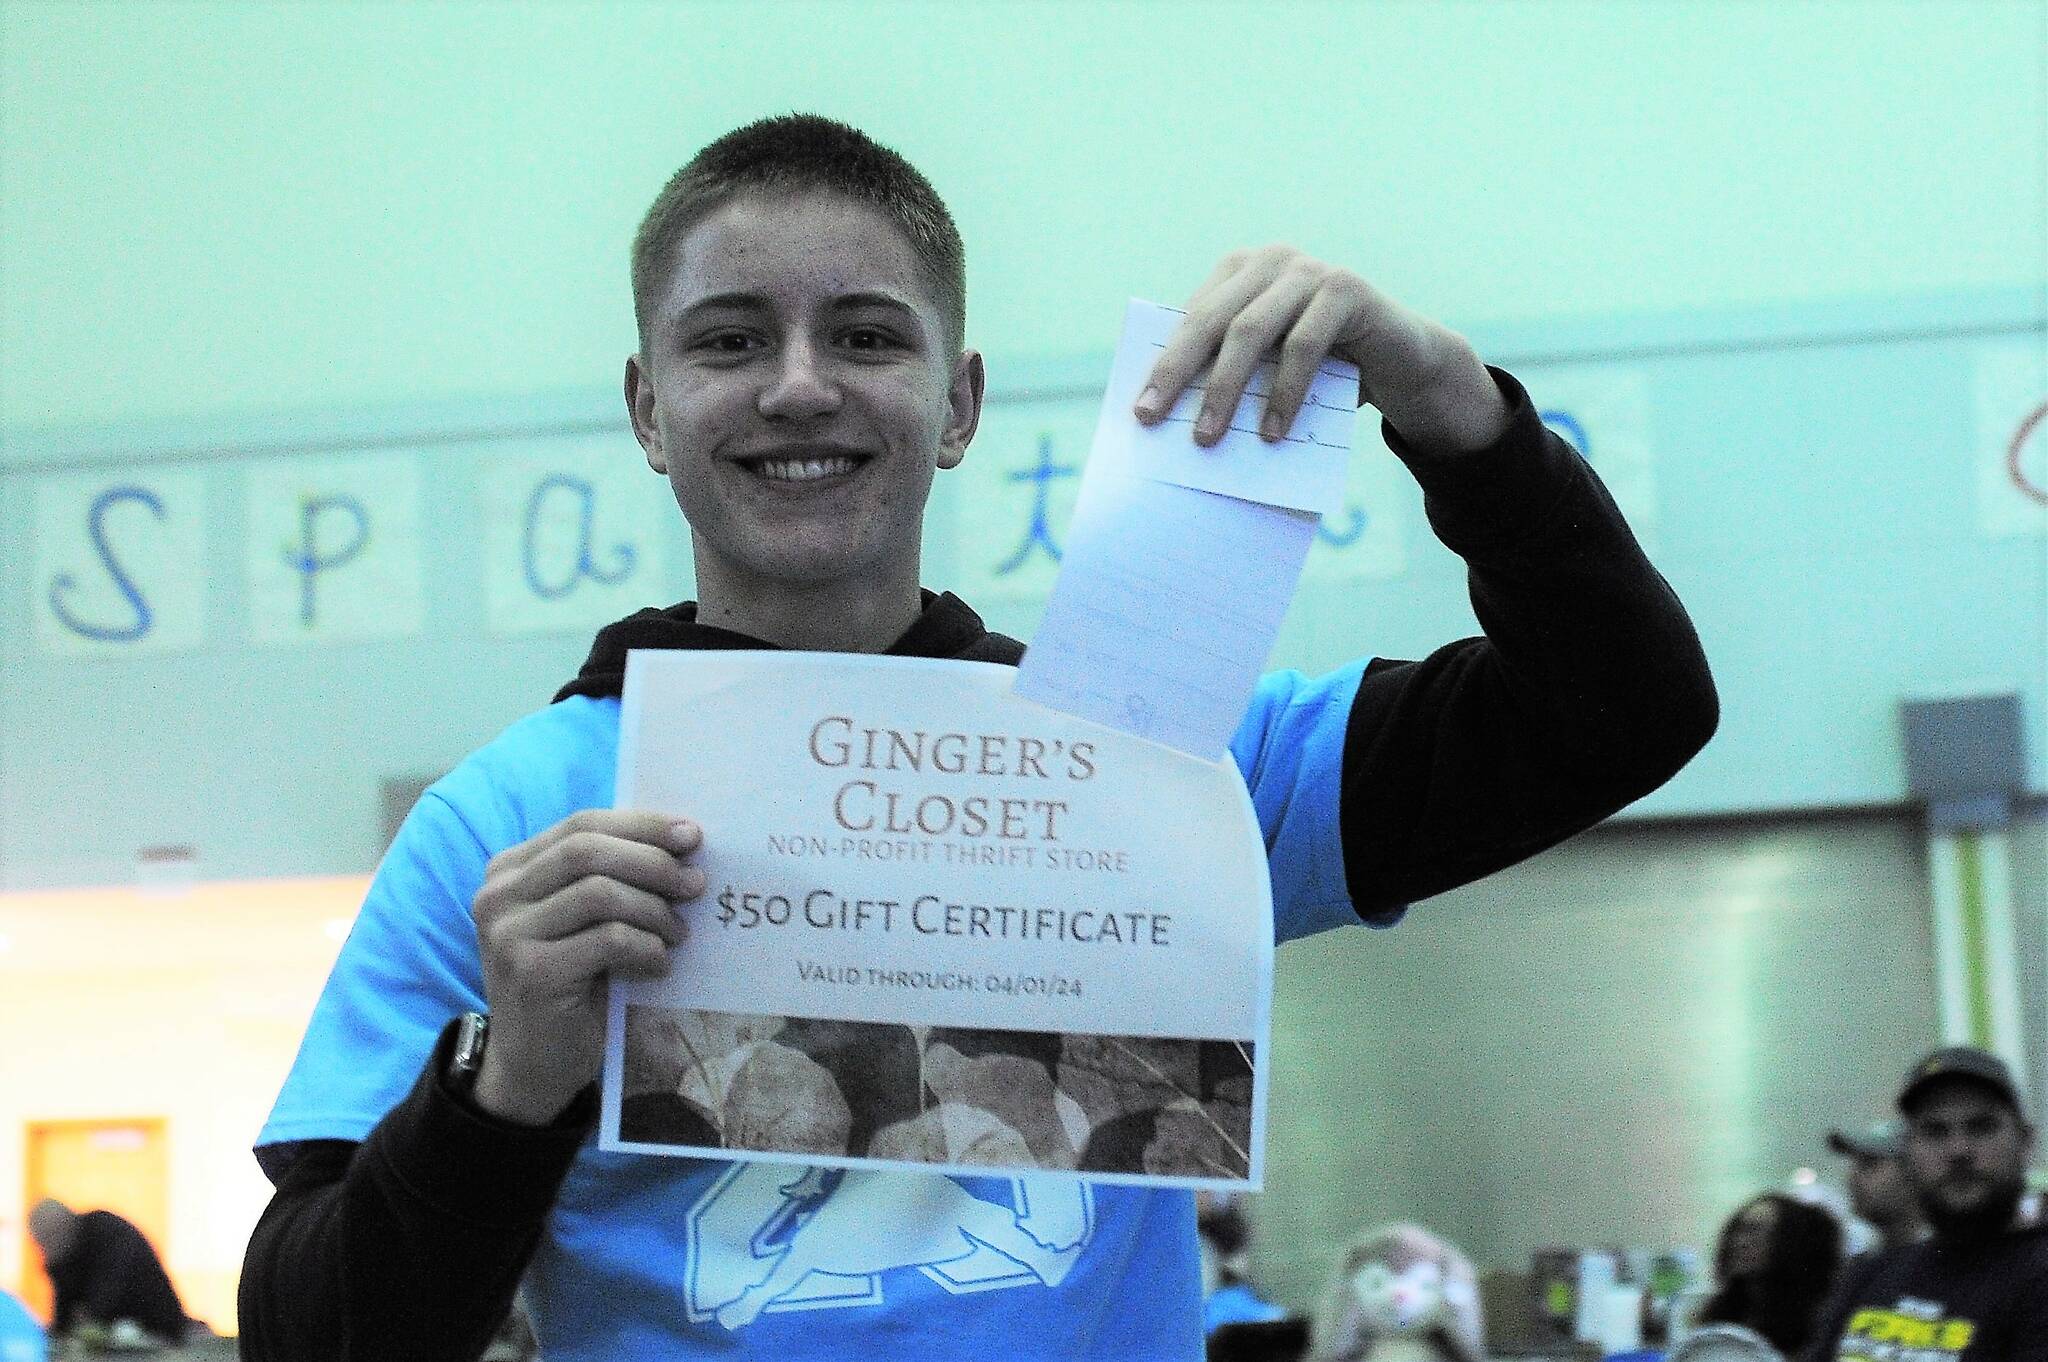 Senior Klayton Helvey displays a $50 gift certificate for Ginger’s Closet. Photo by Lonnie Archibald